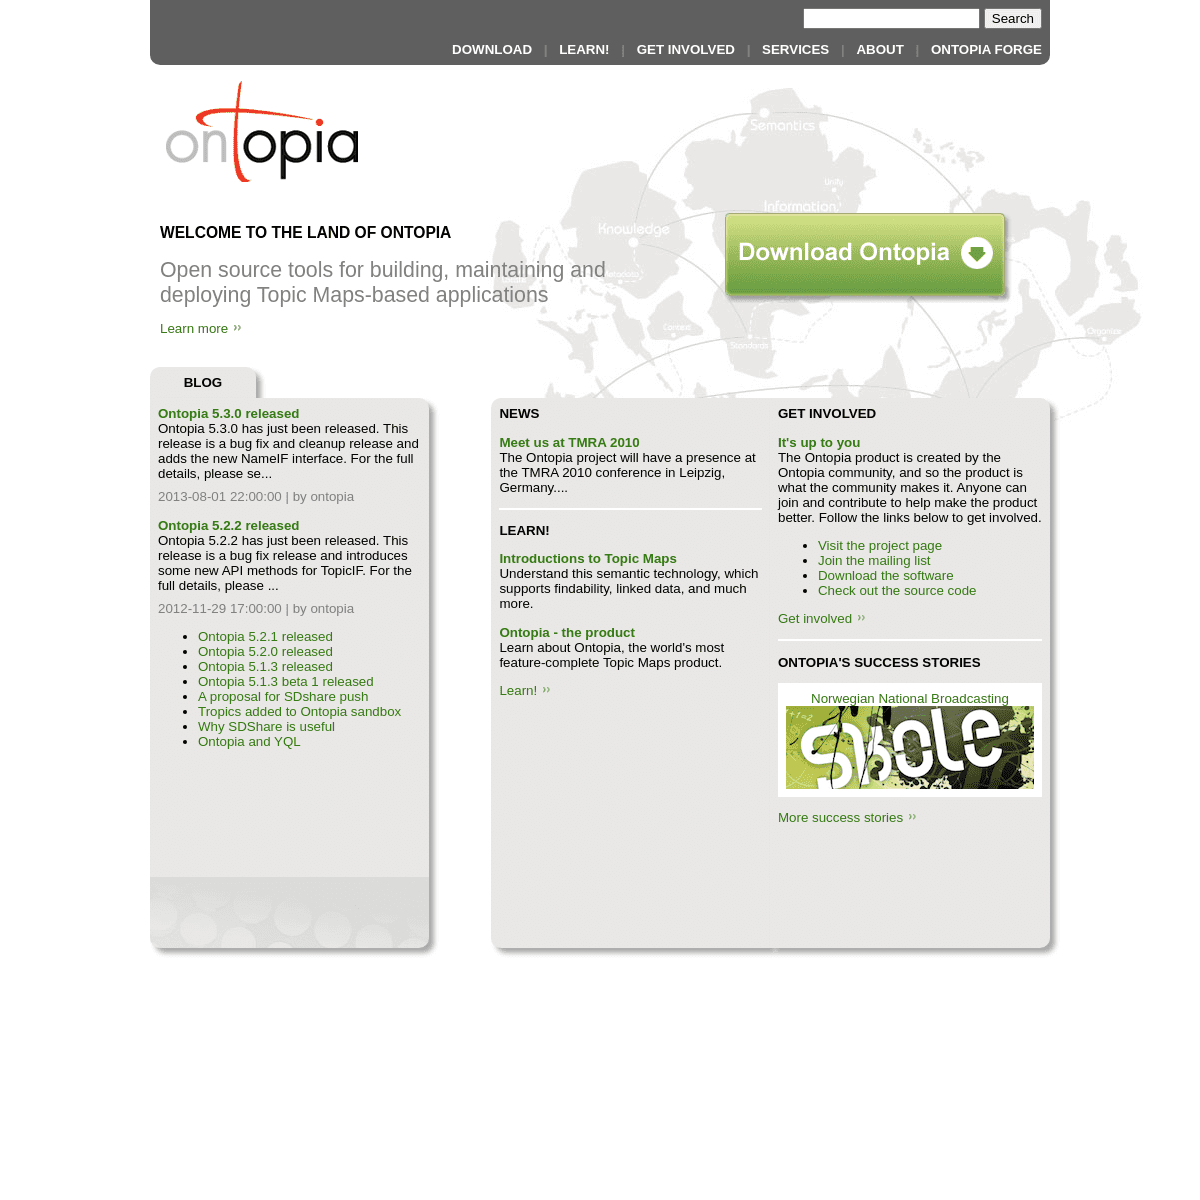 A complete backup of https://ontopia.net